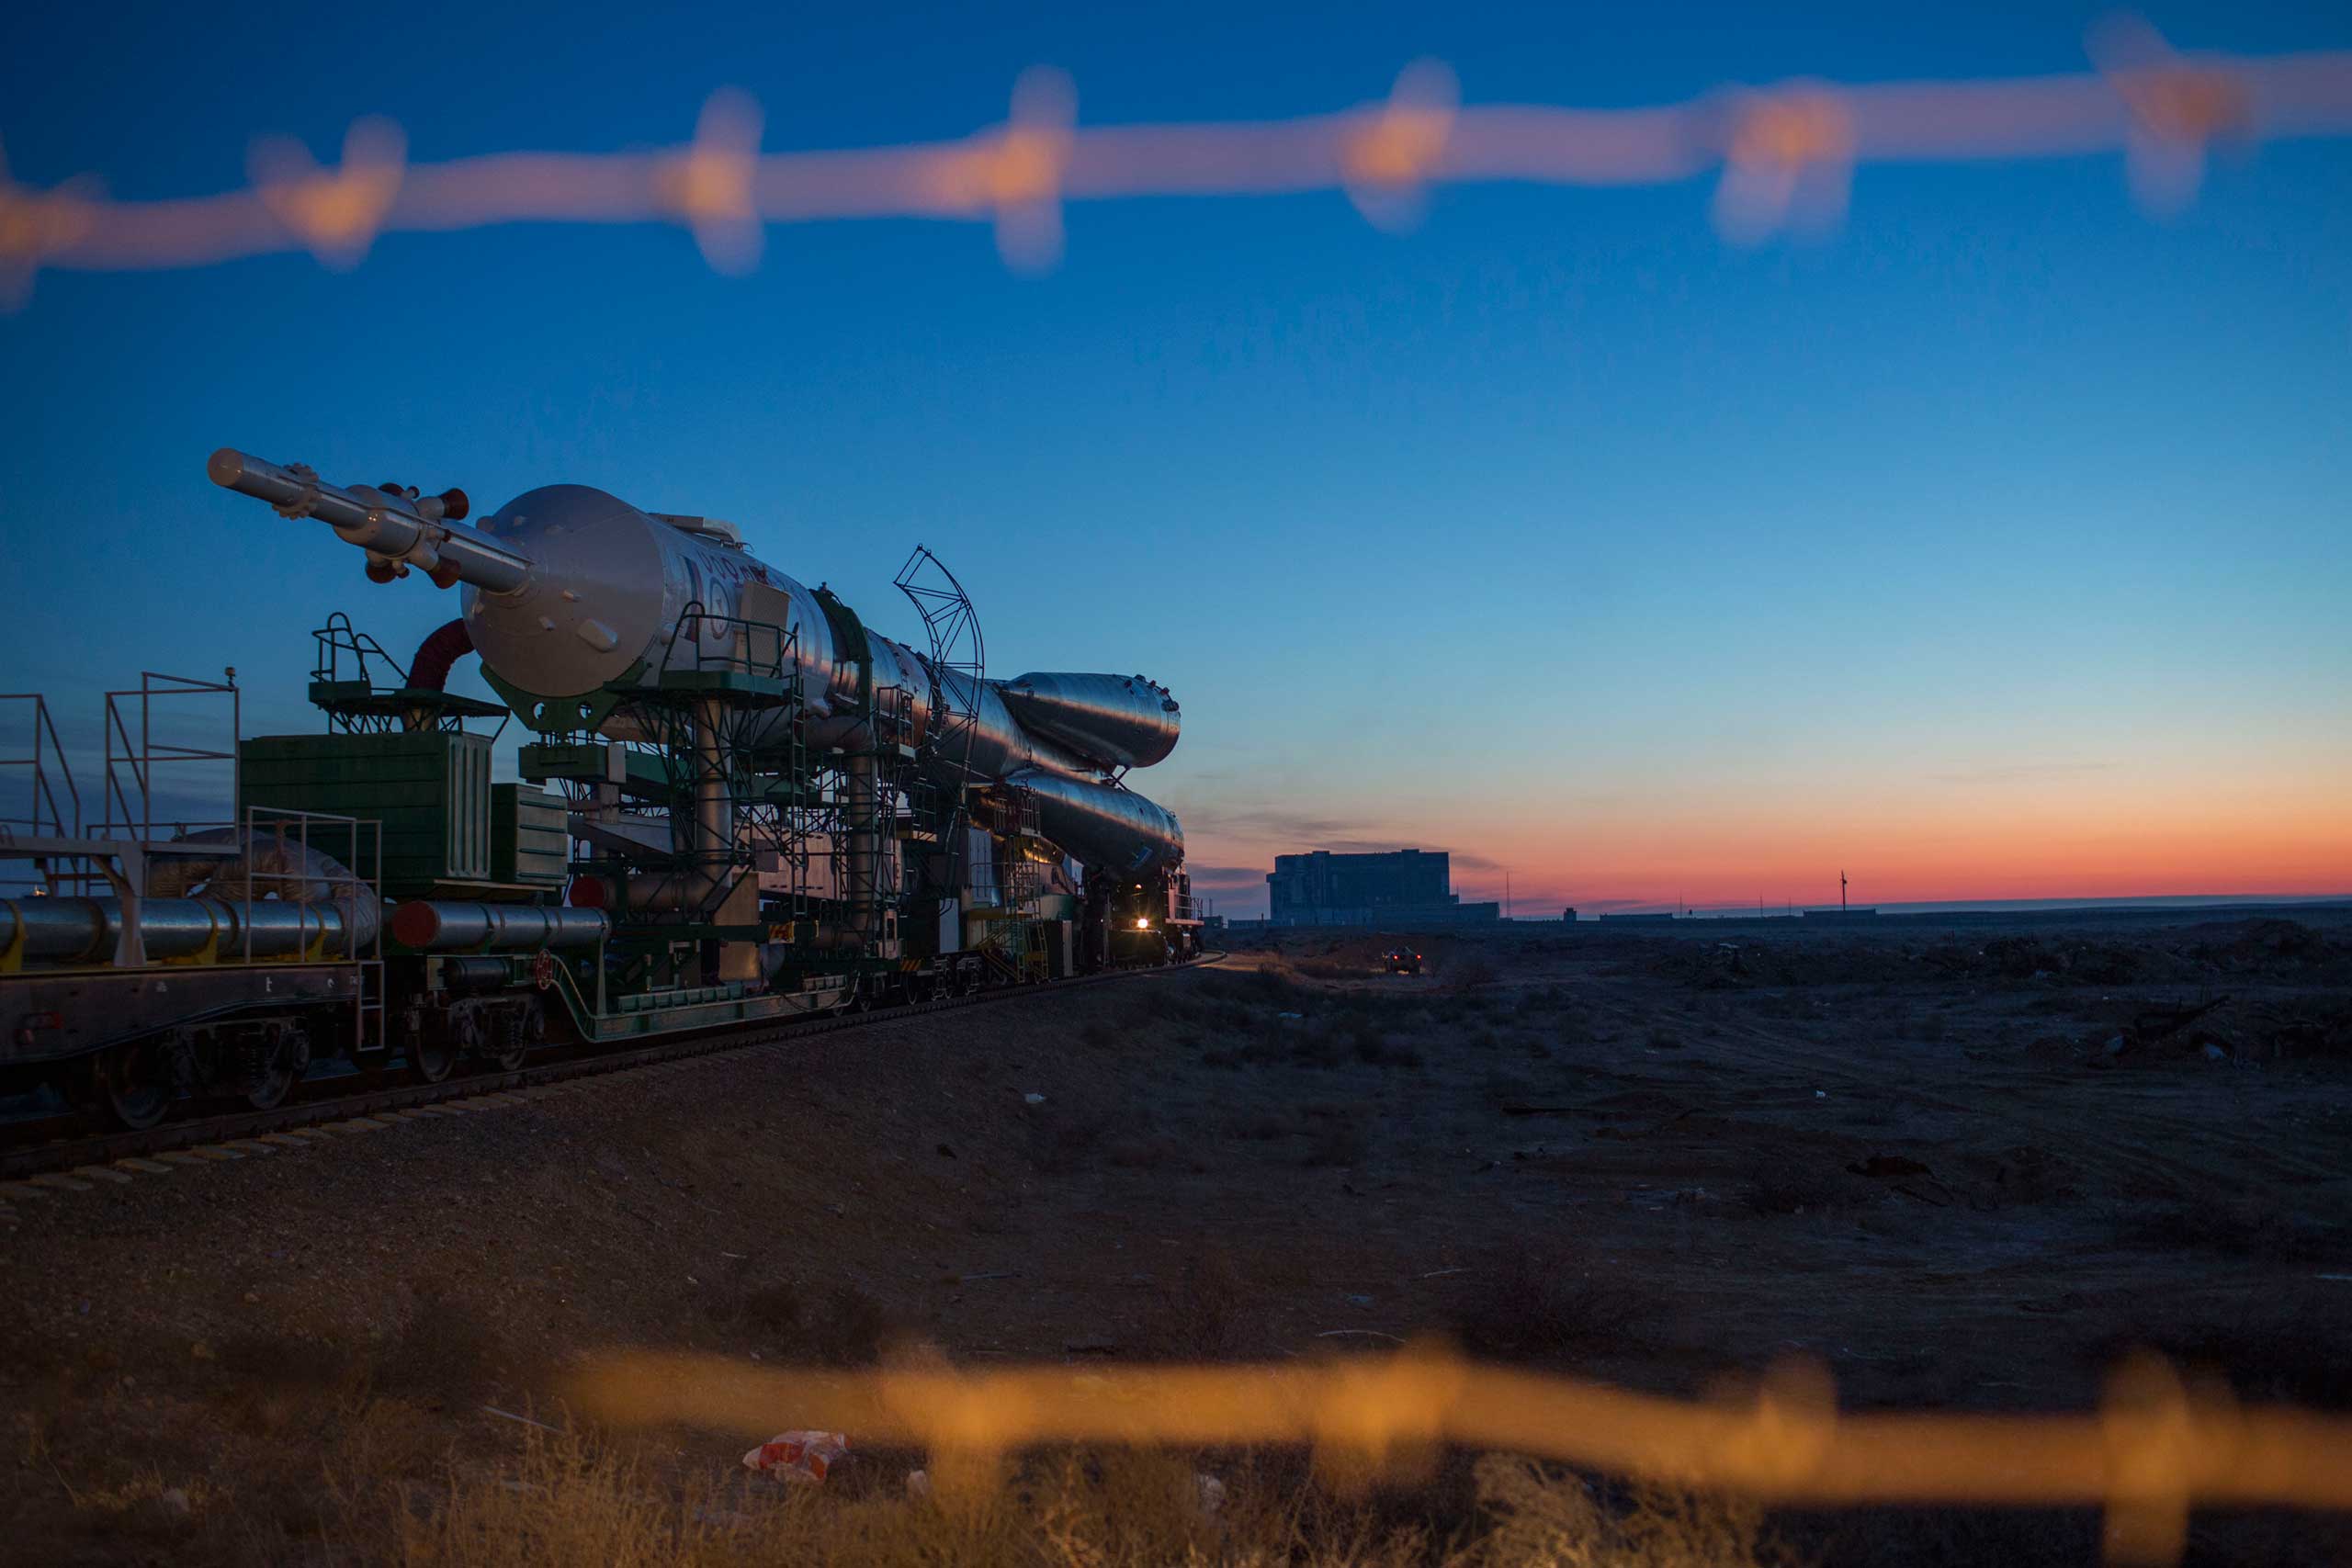 The Soyuz makes its slow crawl to Pad 1, also known as Yuri Gagarin's pad, at the Baikonur Cosmodrome in Kazakhstan on Wednesday, March 25. After the Soyuz is assembled, it is hauled by train to the site of the launch.